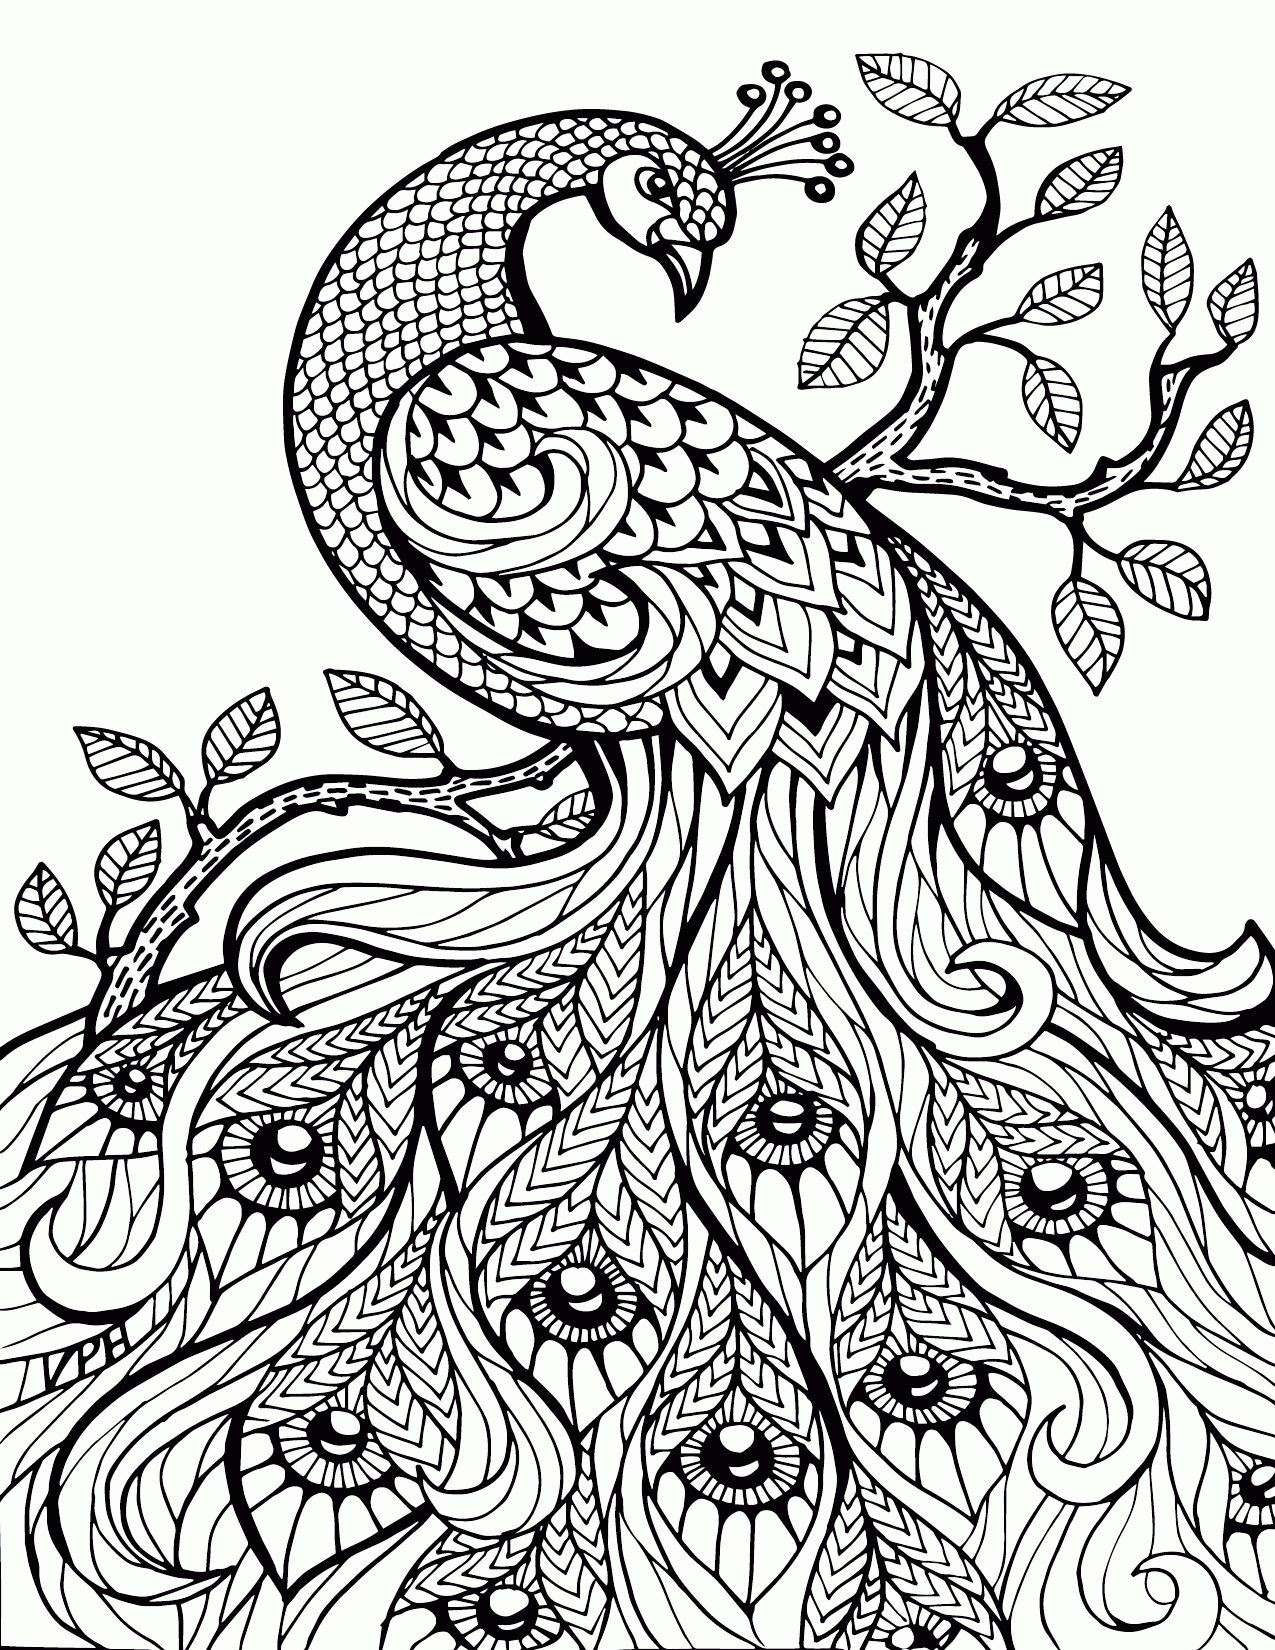 Free Coloring Pages For Adults Printable Easy To Color Animals 